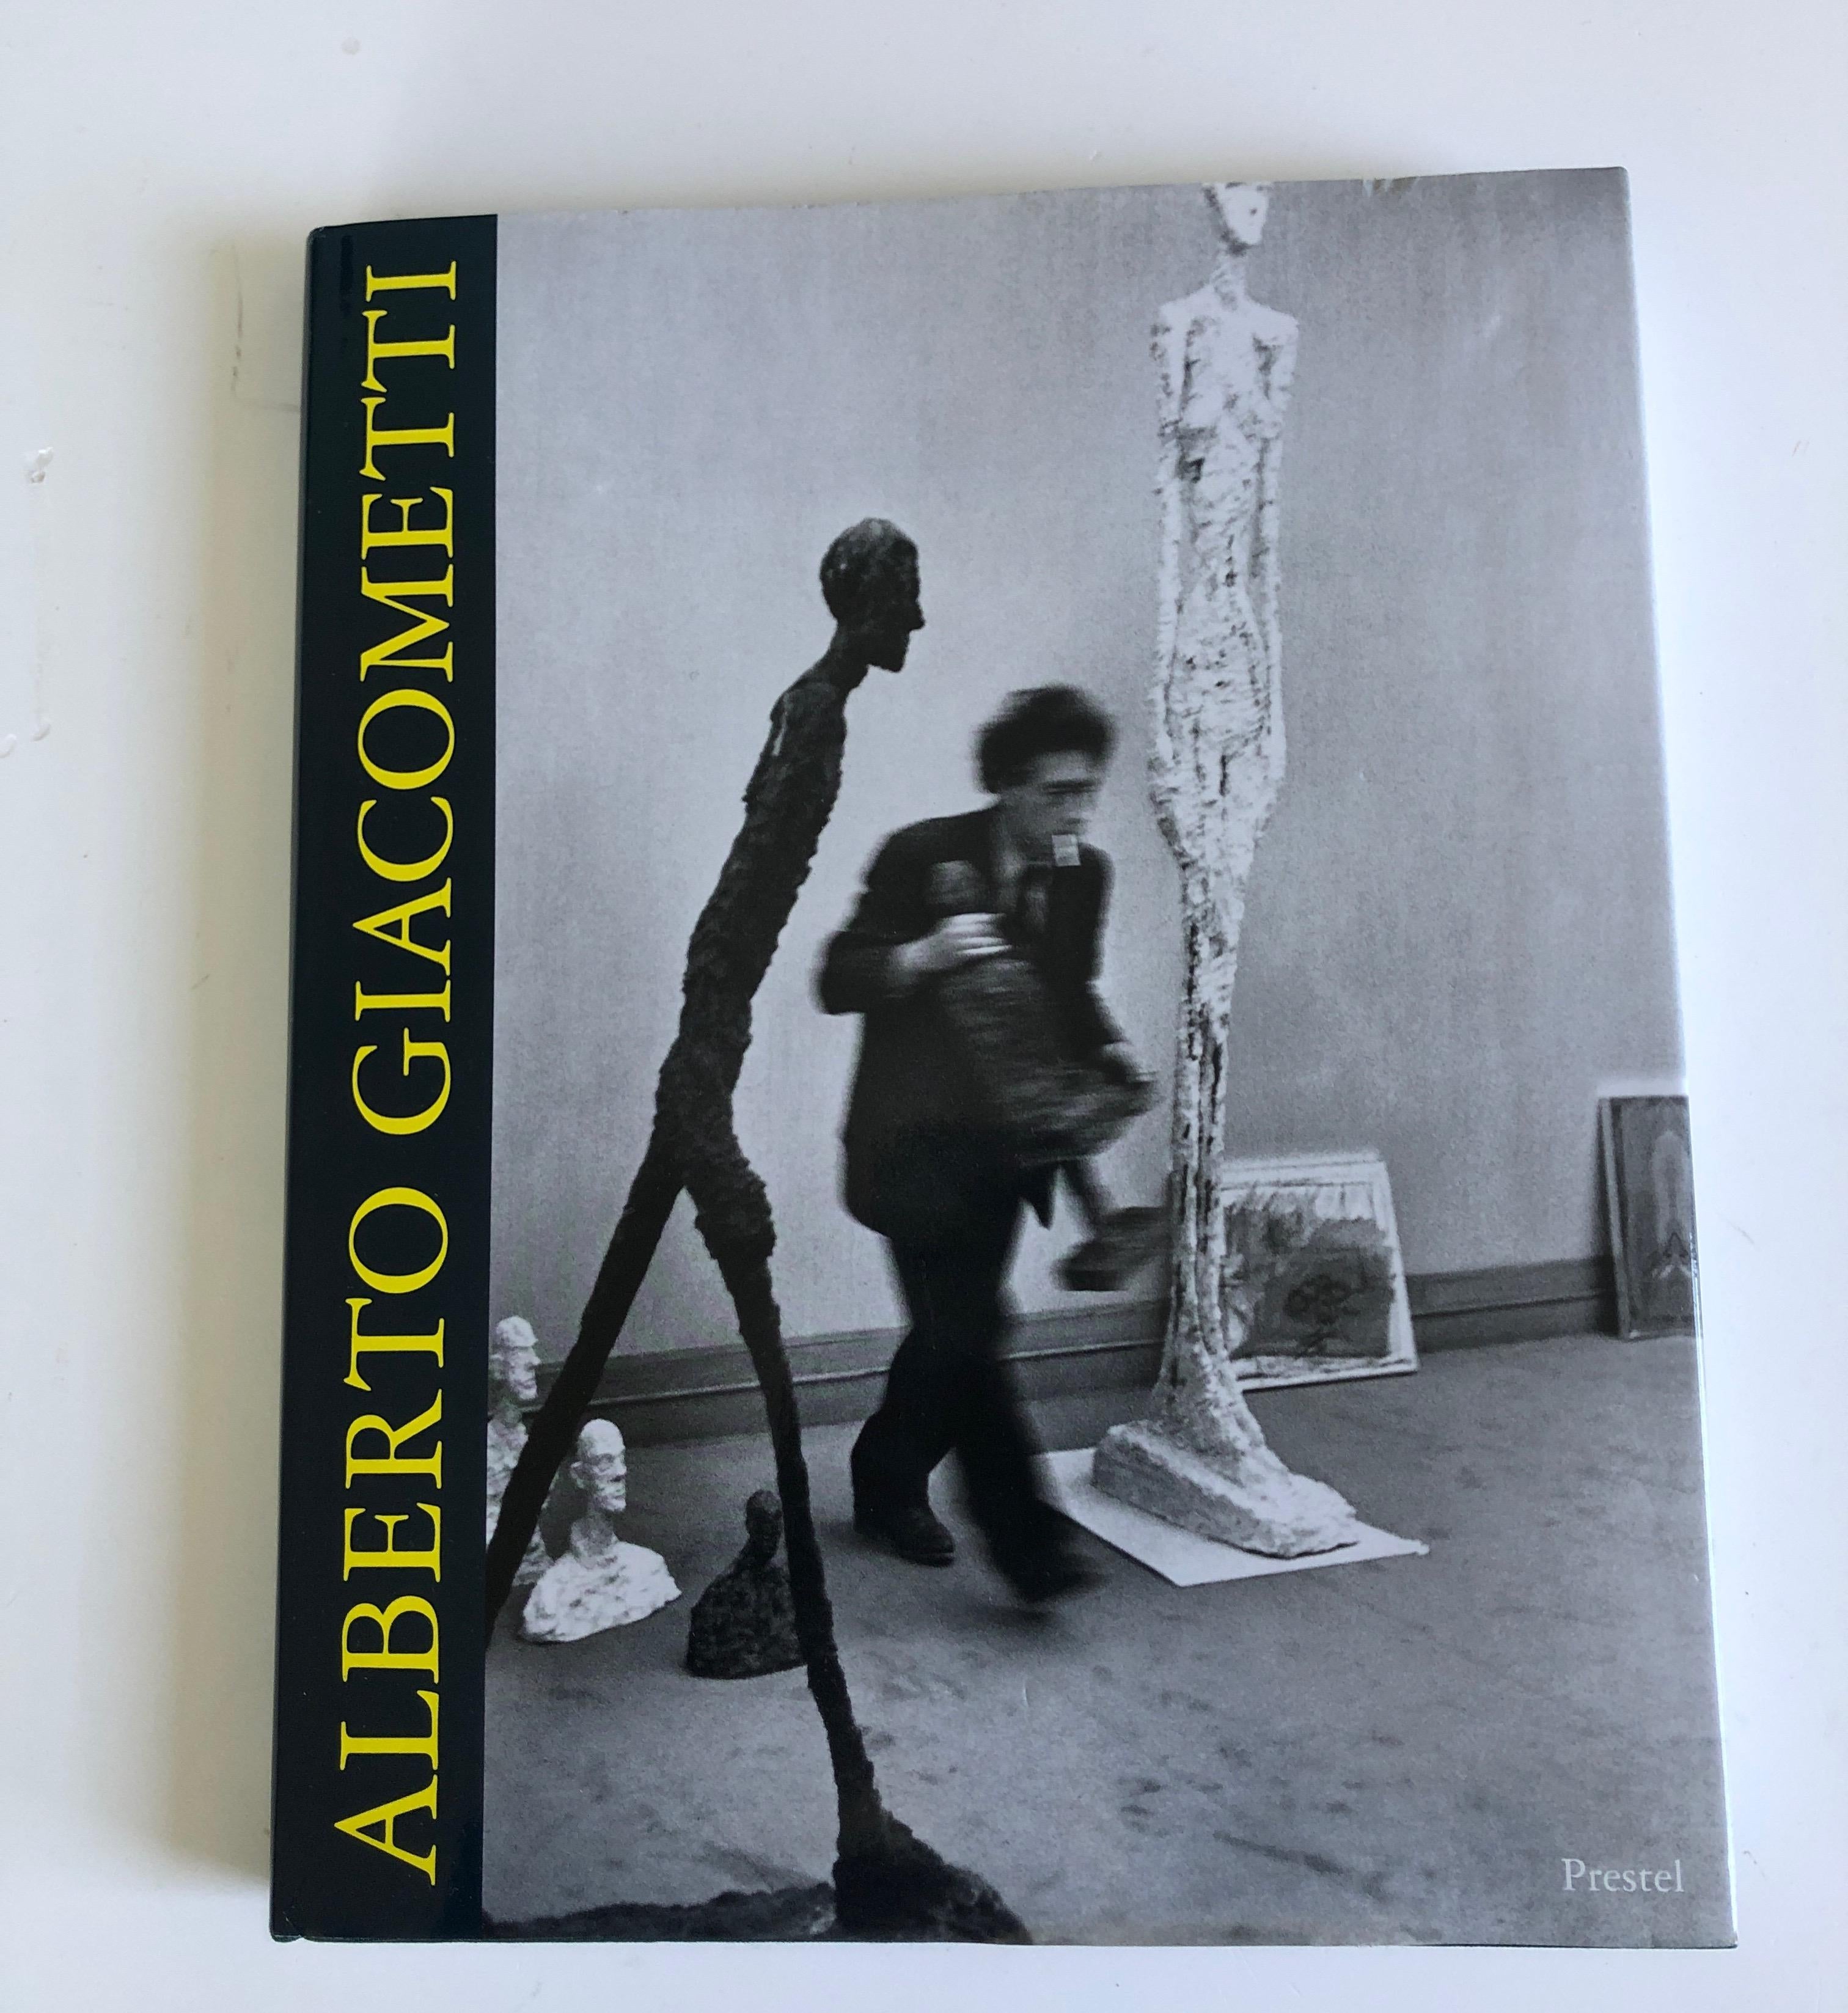 One of the great masters of 20th-century art, the Swiss sculptor Alberto Giacometti captured the existential loneliness of modern humanity with his spindly, attenuated figures whose life-like gazes pierce the vastness of space. Uniting more than 250